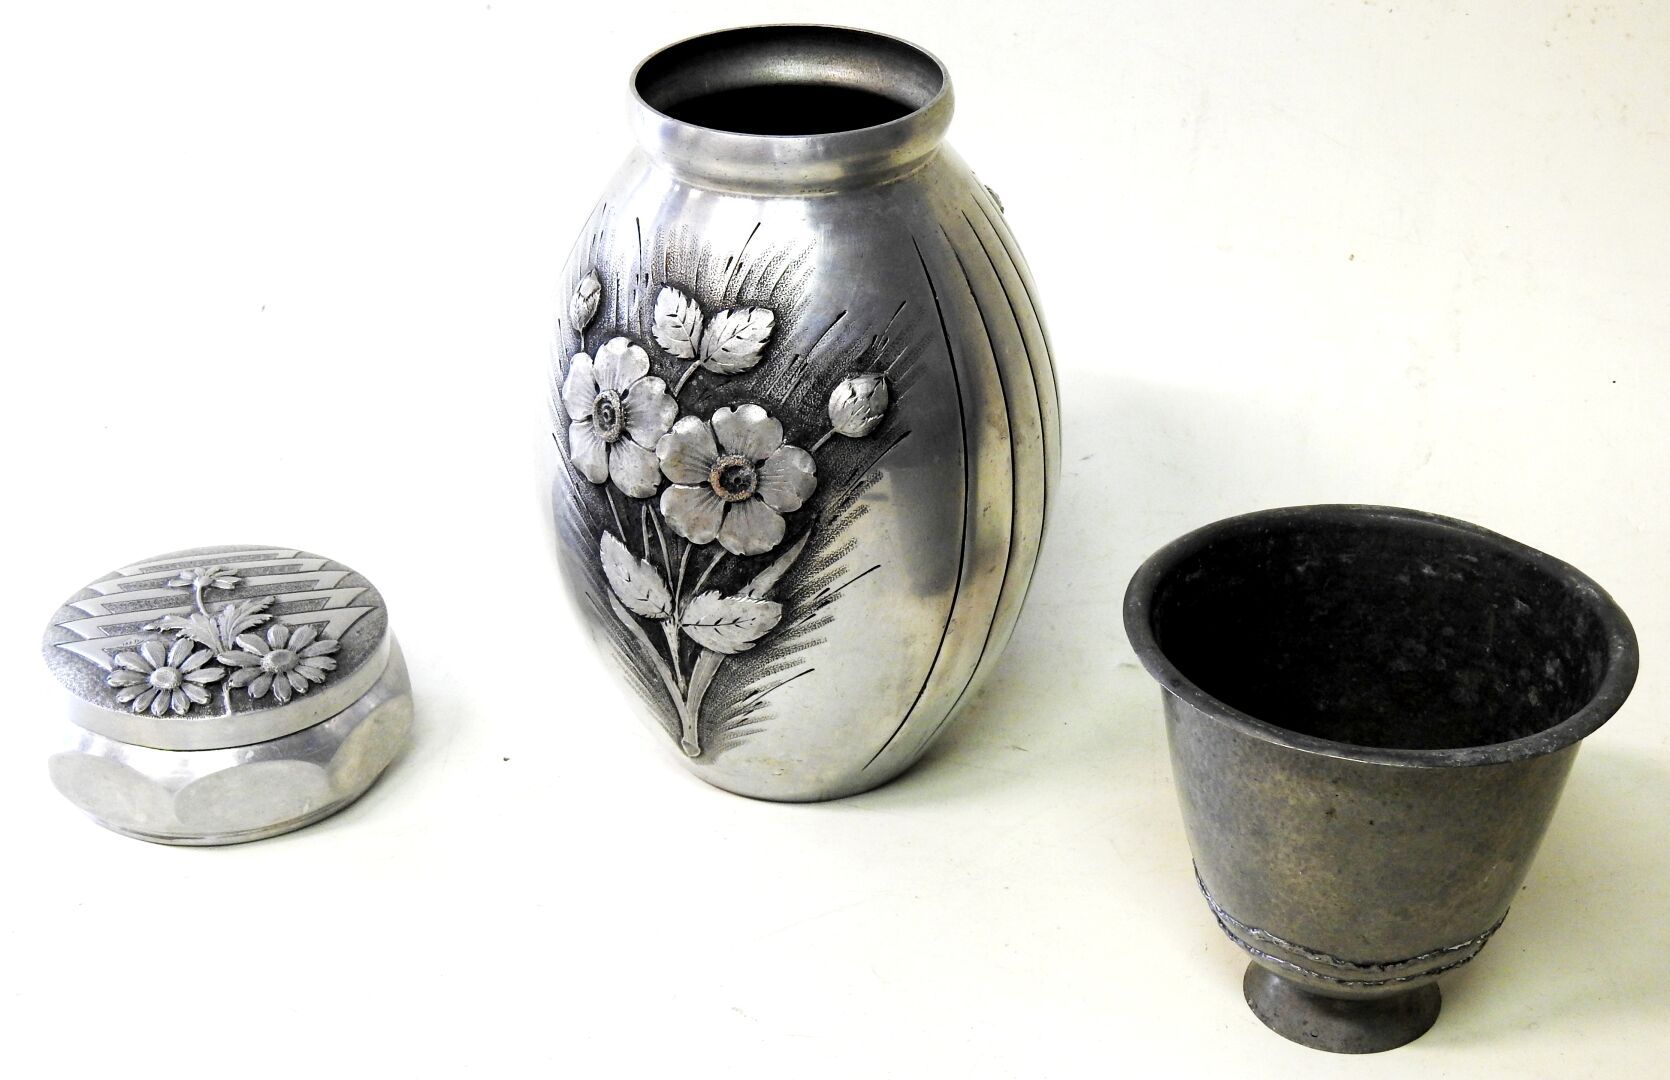 Null René DELAVAN (active from 1926-1958) & others

Pewter lot including :

A va&hellip;